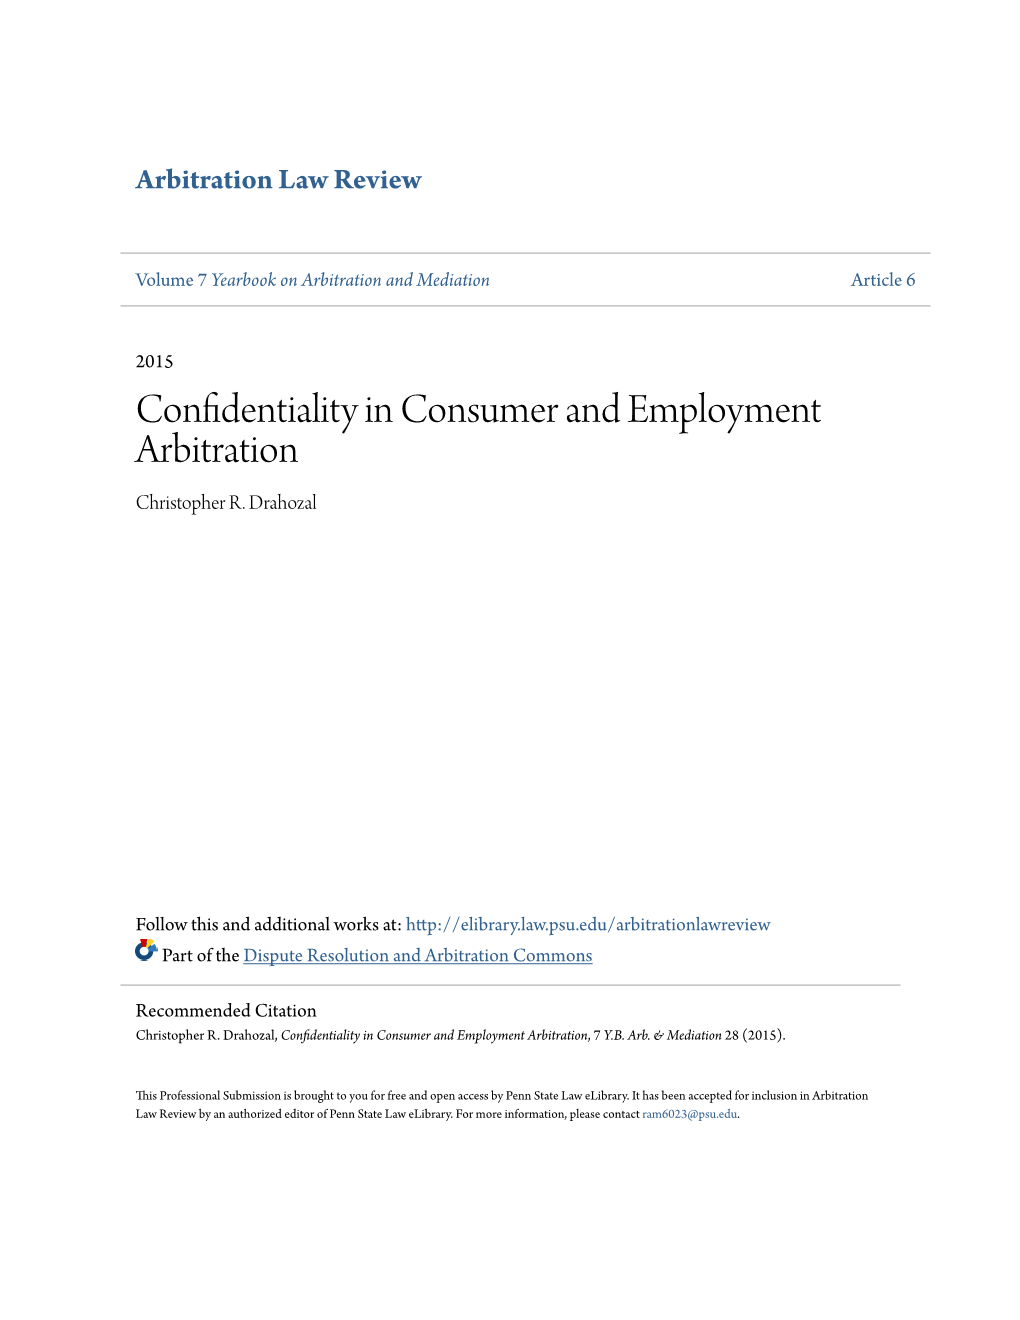 Confidentiality in Consumer and Employment Arbitration Christopher R